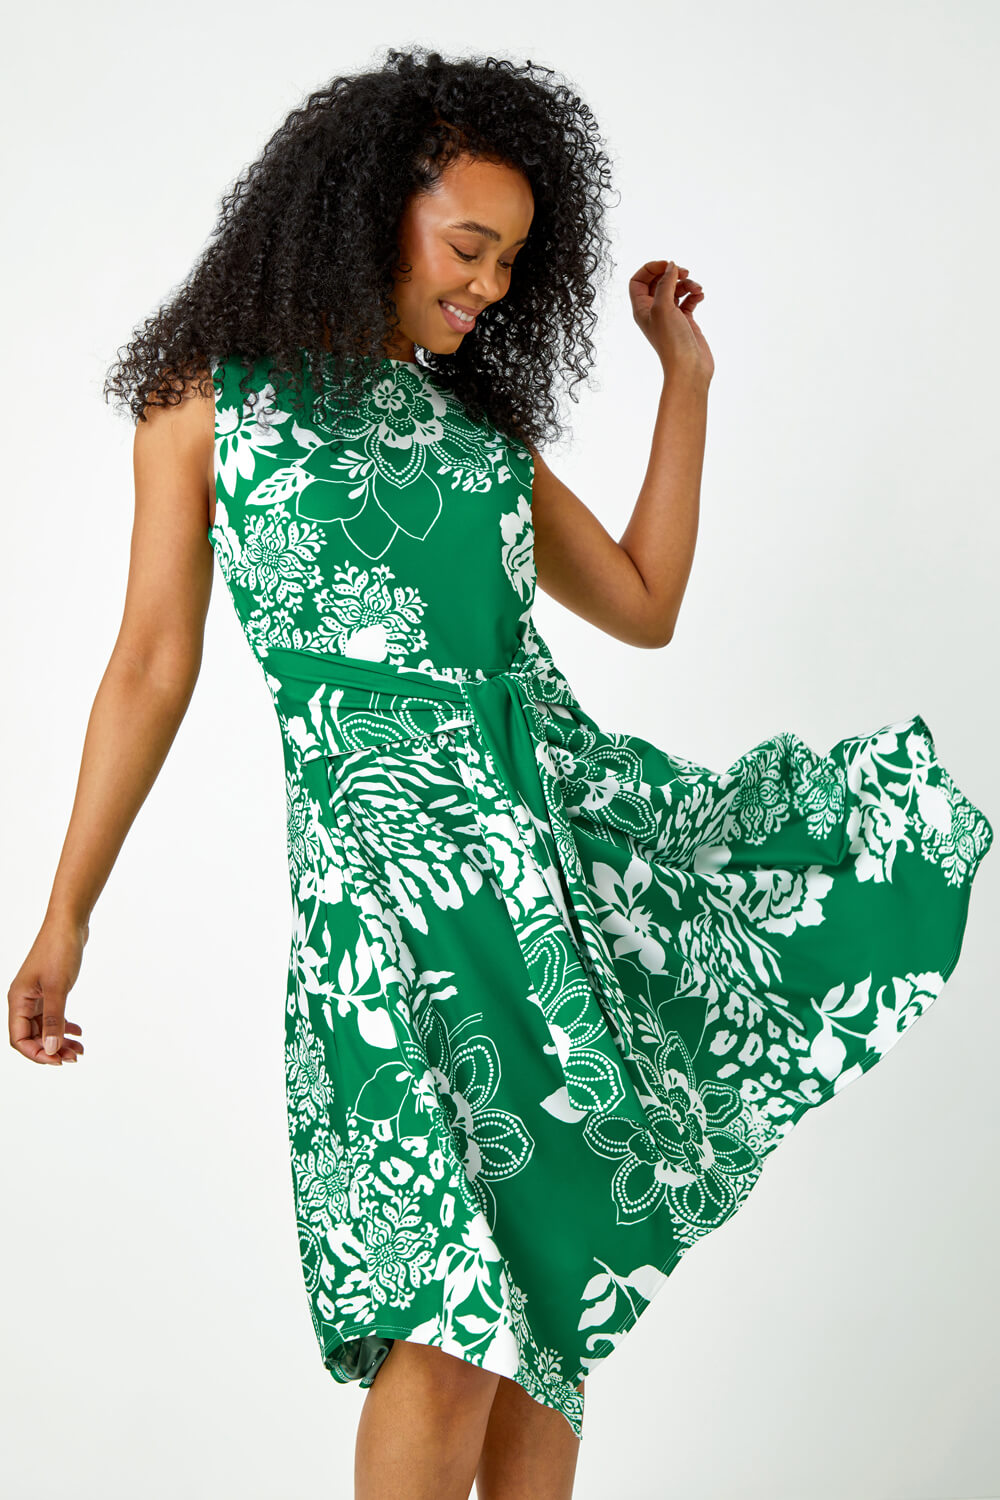 Green Petite Tie Waist Floral Stretch Dress, Image 2 of 5